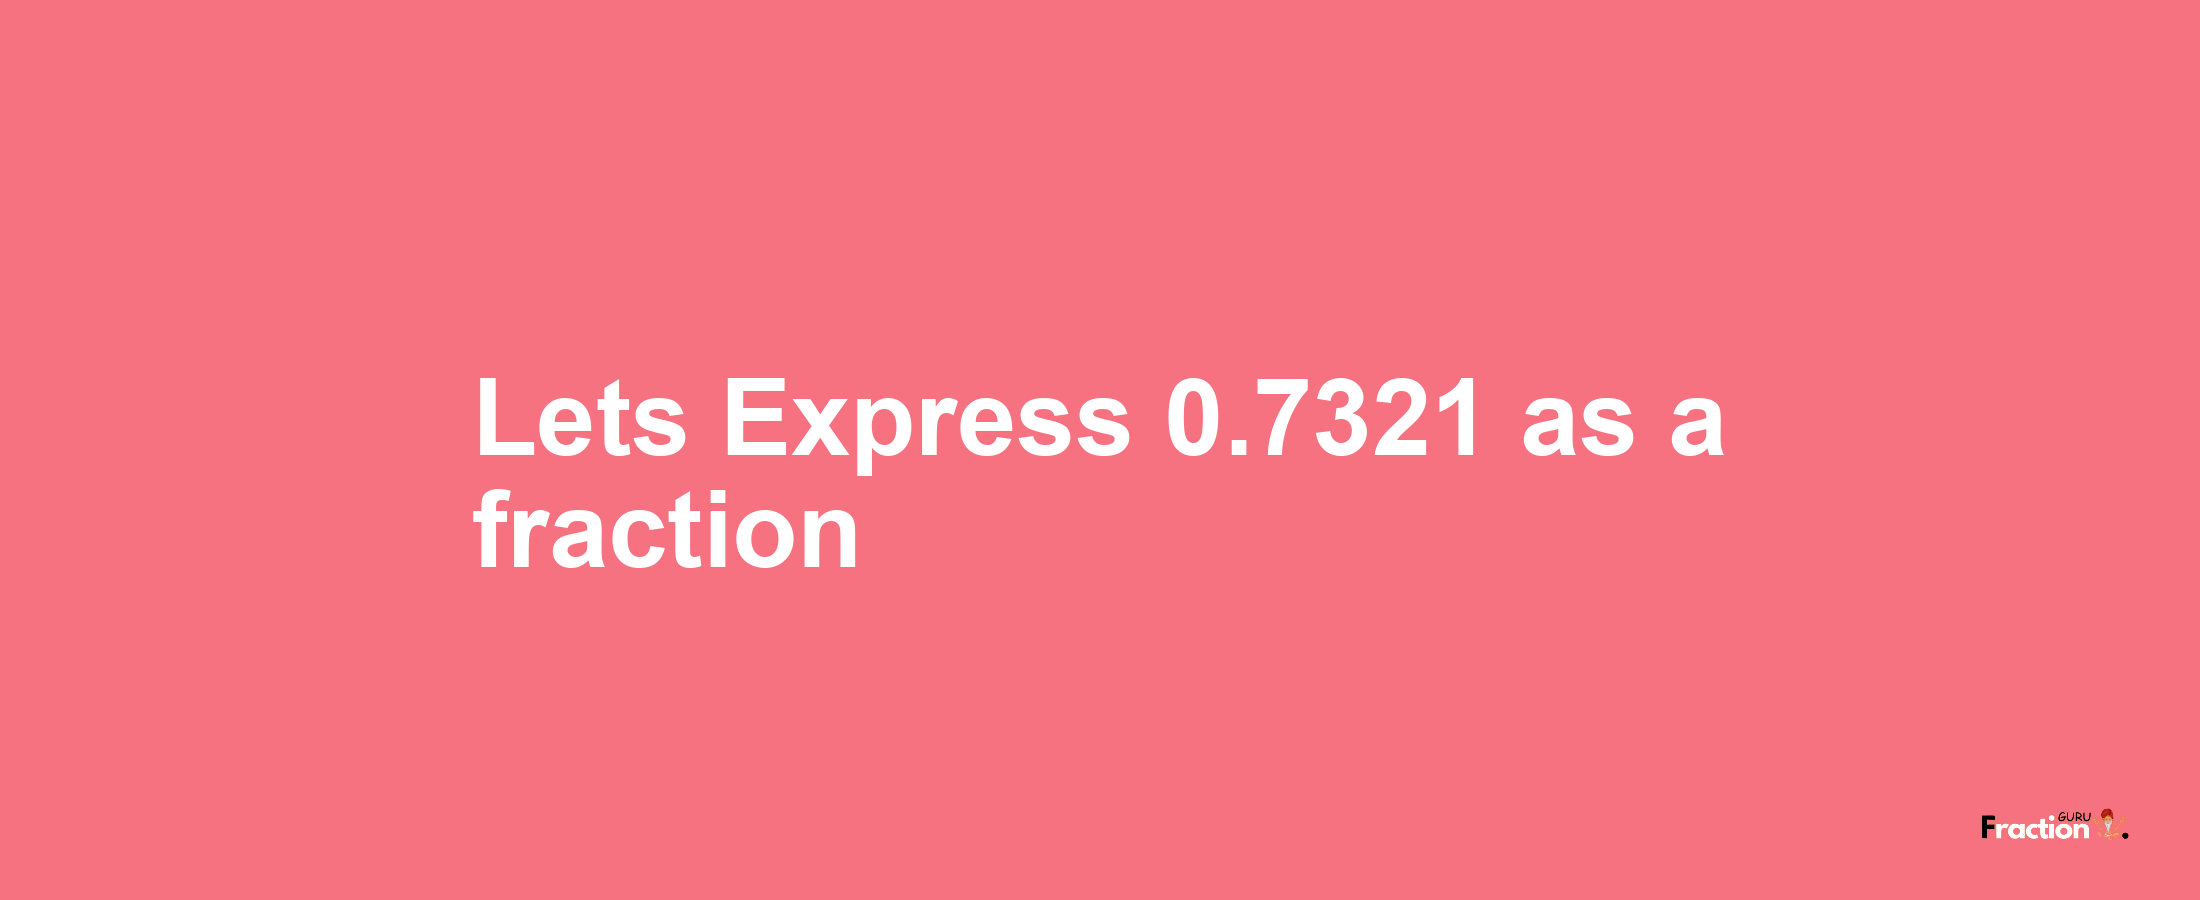 Lets Express 0.7321 as afraction